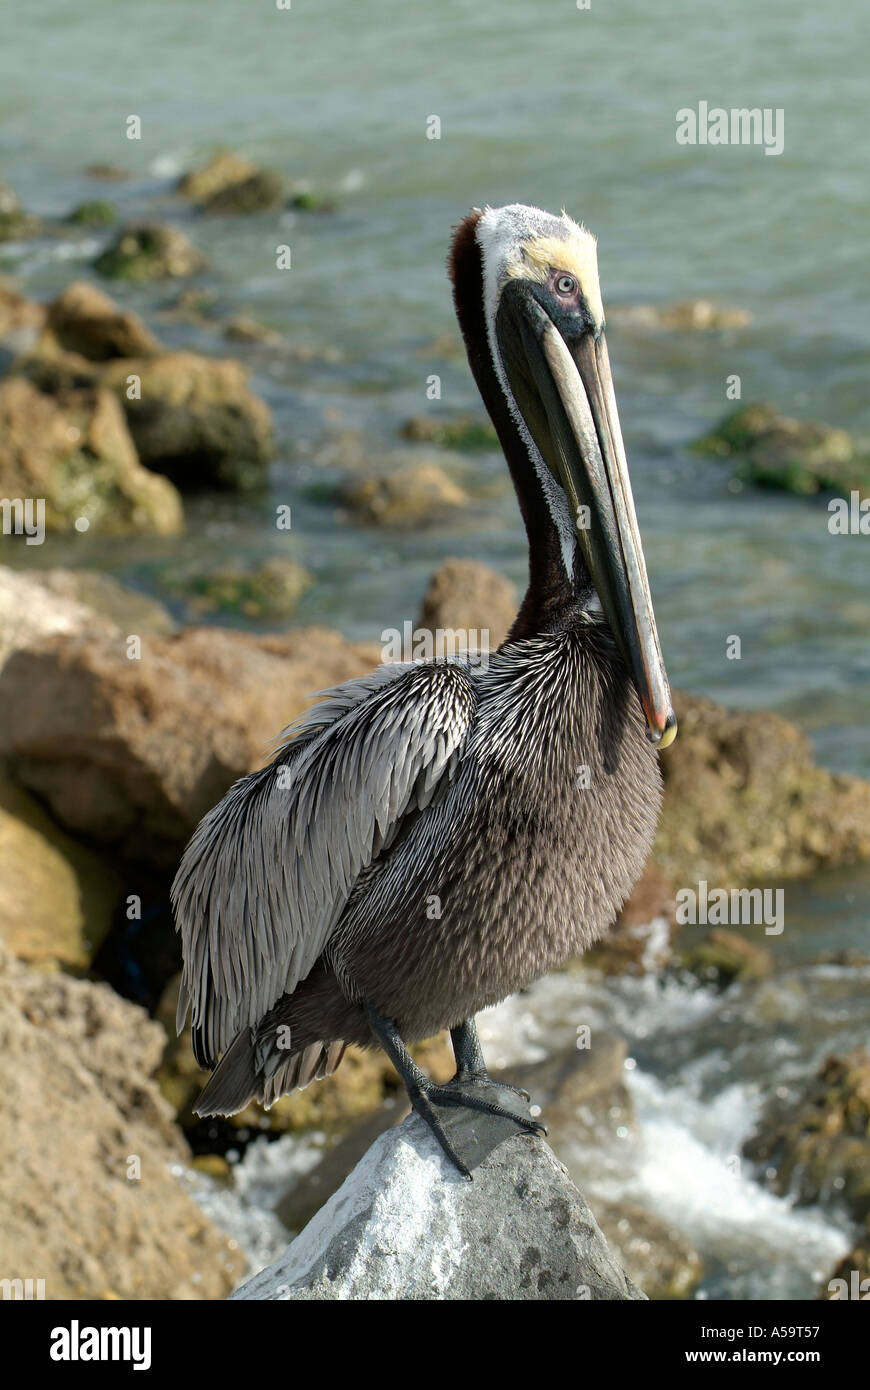 Florida water birds on constant look out for food Stock Photo